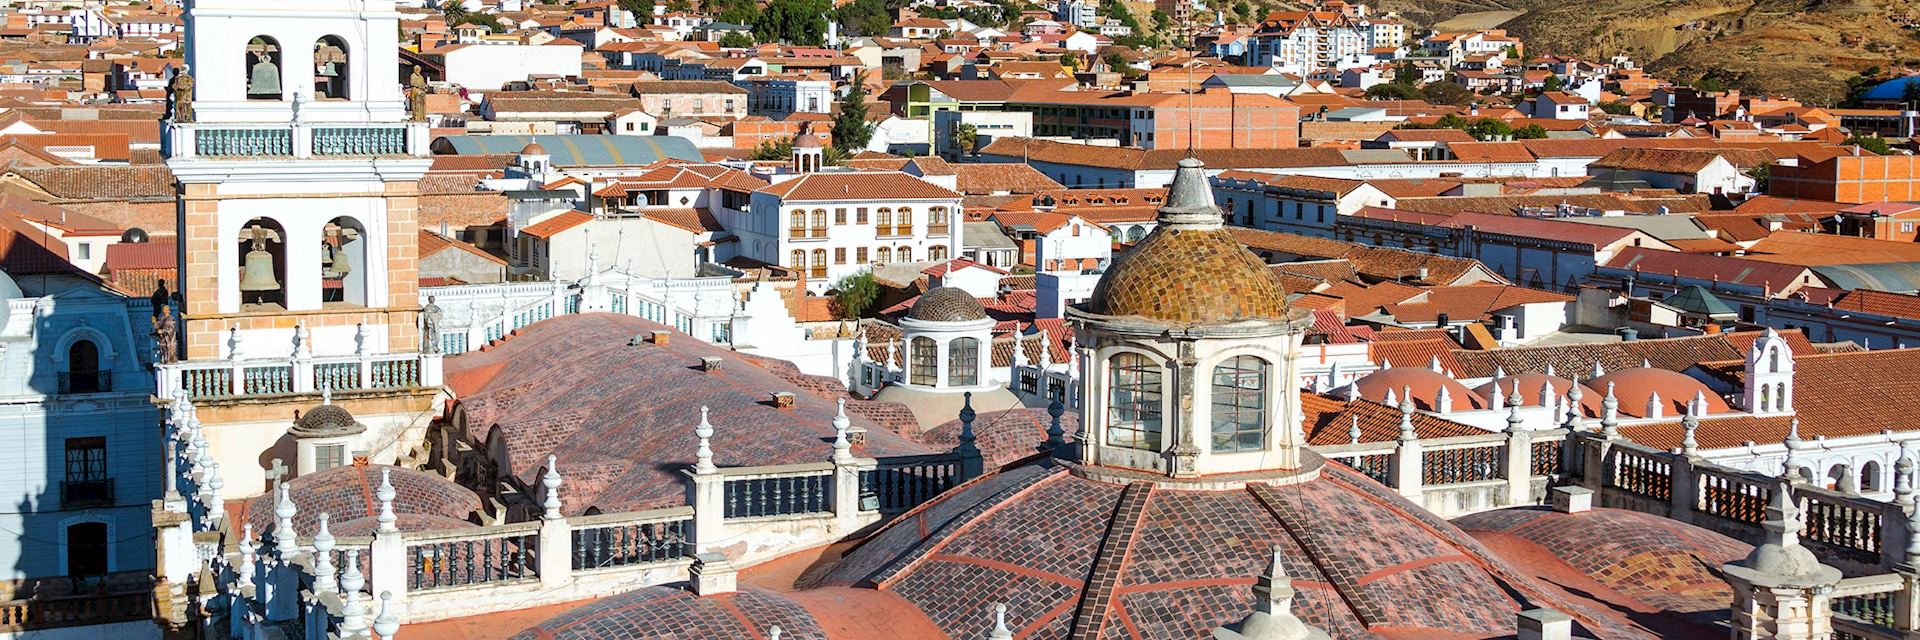 View over the UNESCO World Heritage Site of Sucre